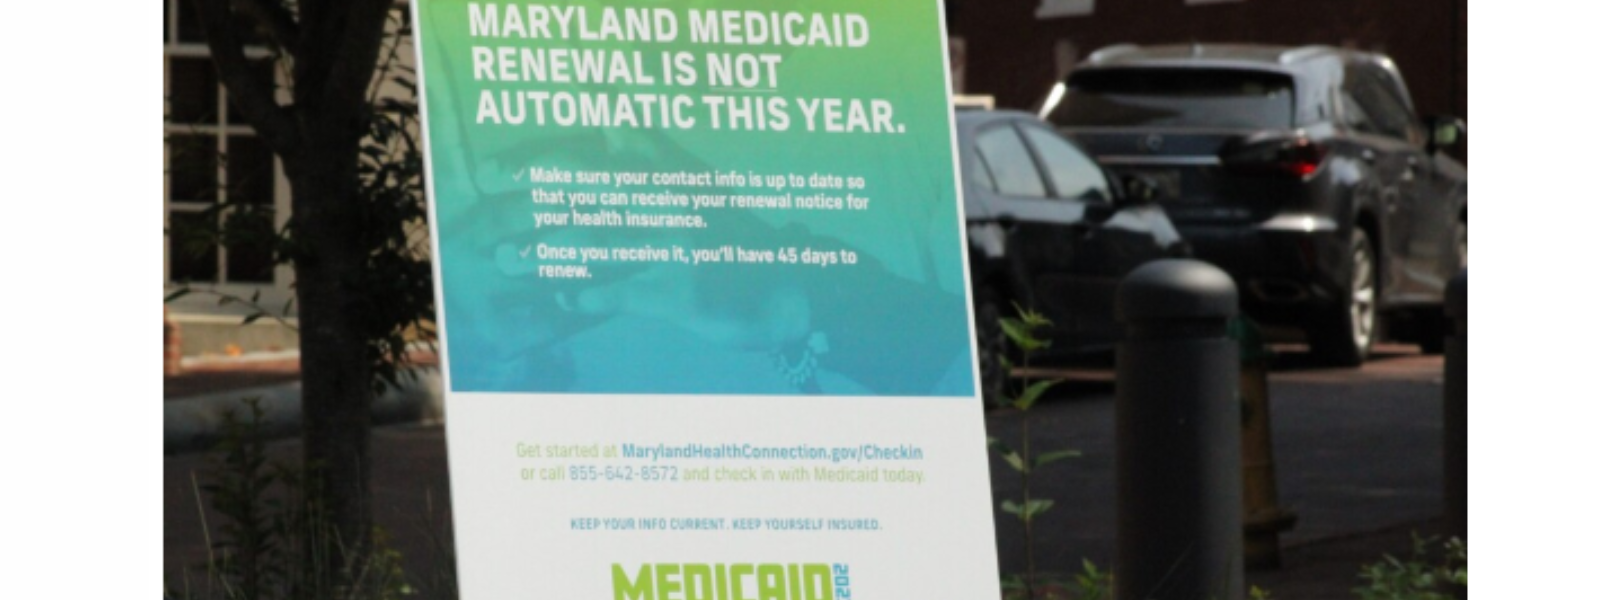 Medicaid Check-In Banner